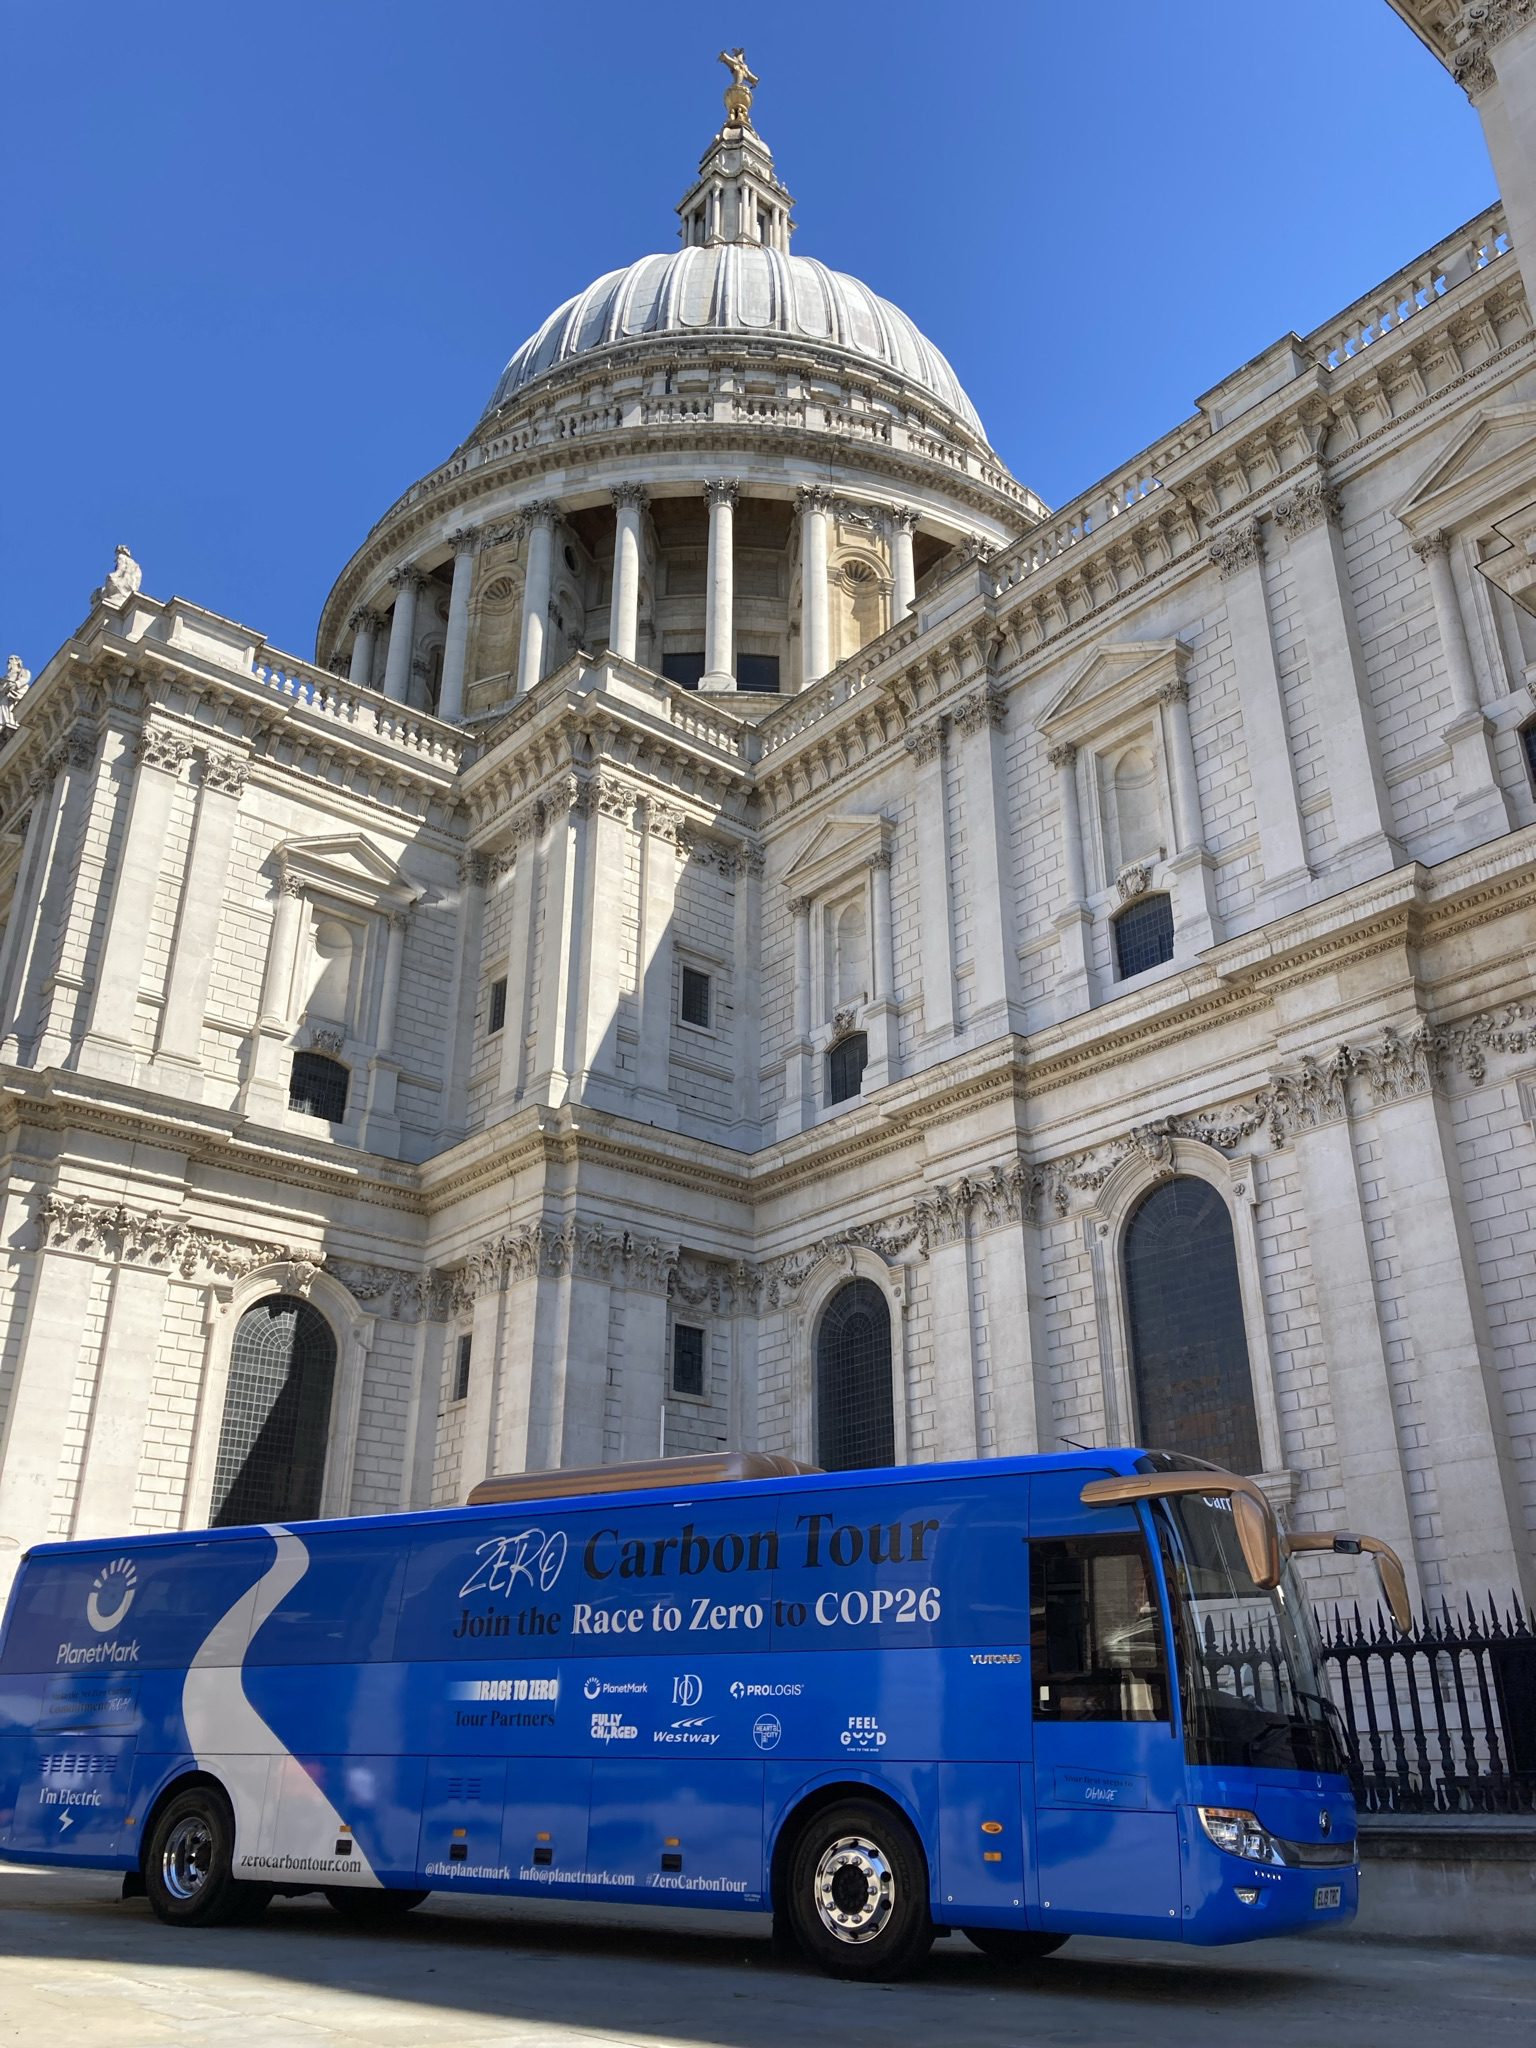 PlanetMark Carbon Tour bus outside St Pauls Cathedral